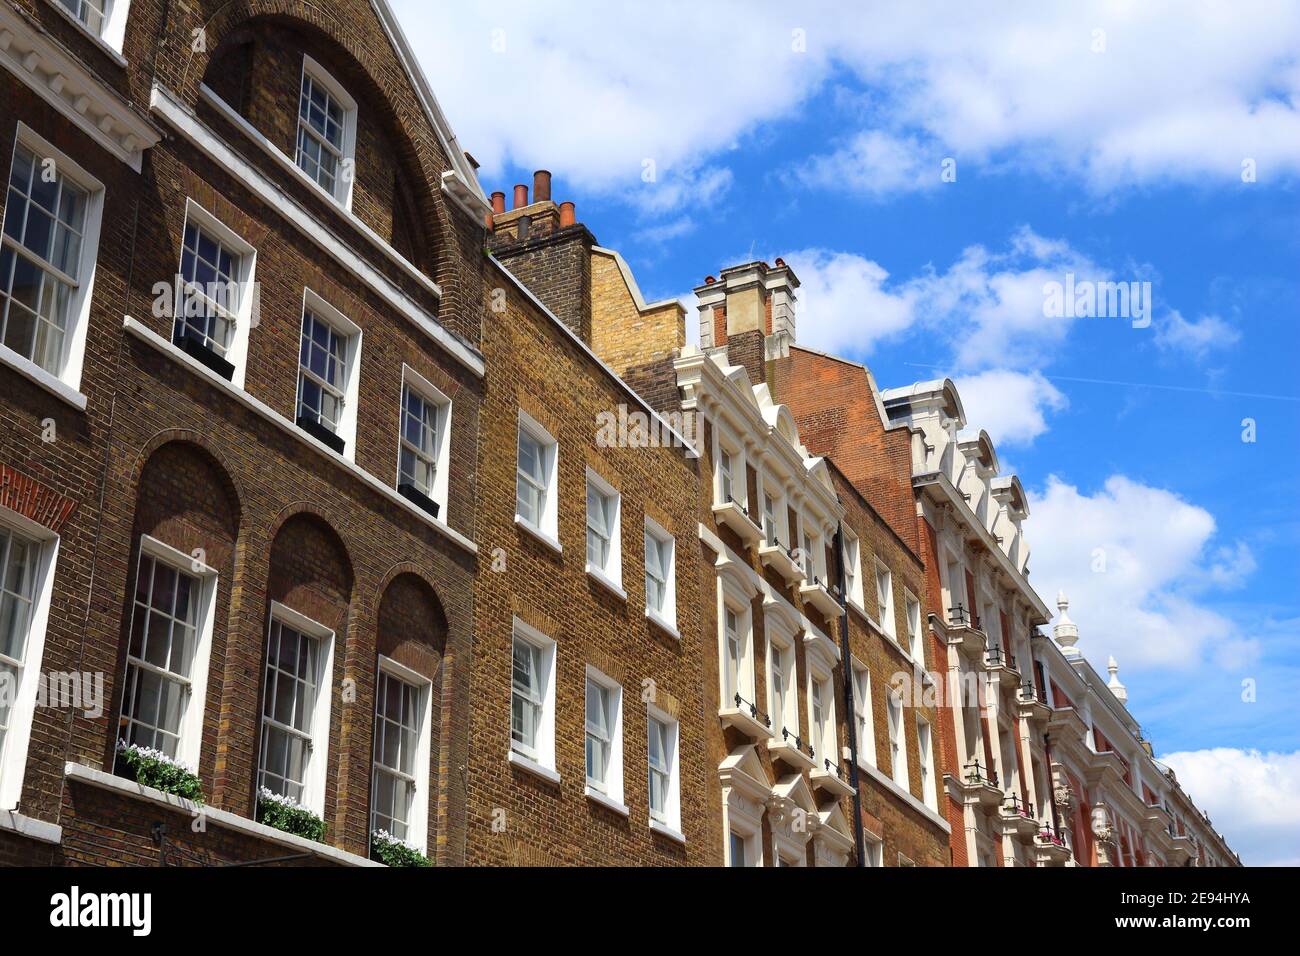 Covent Garden street view in London, UK. Stock Photo